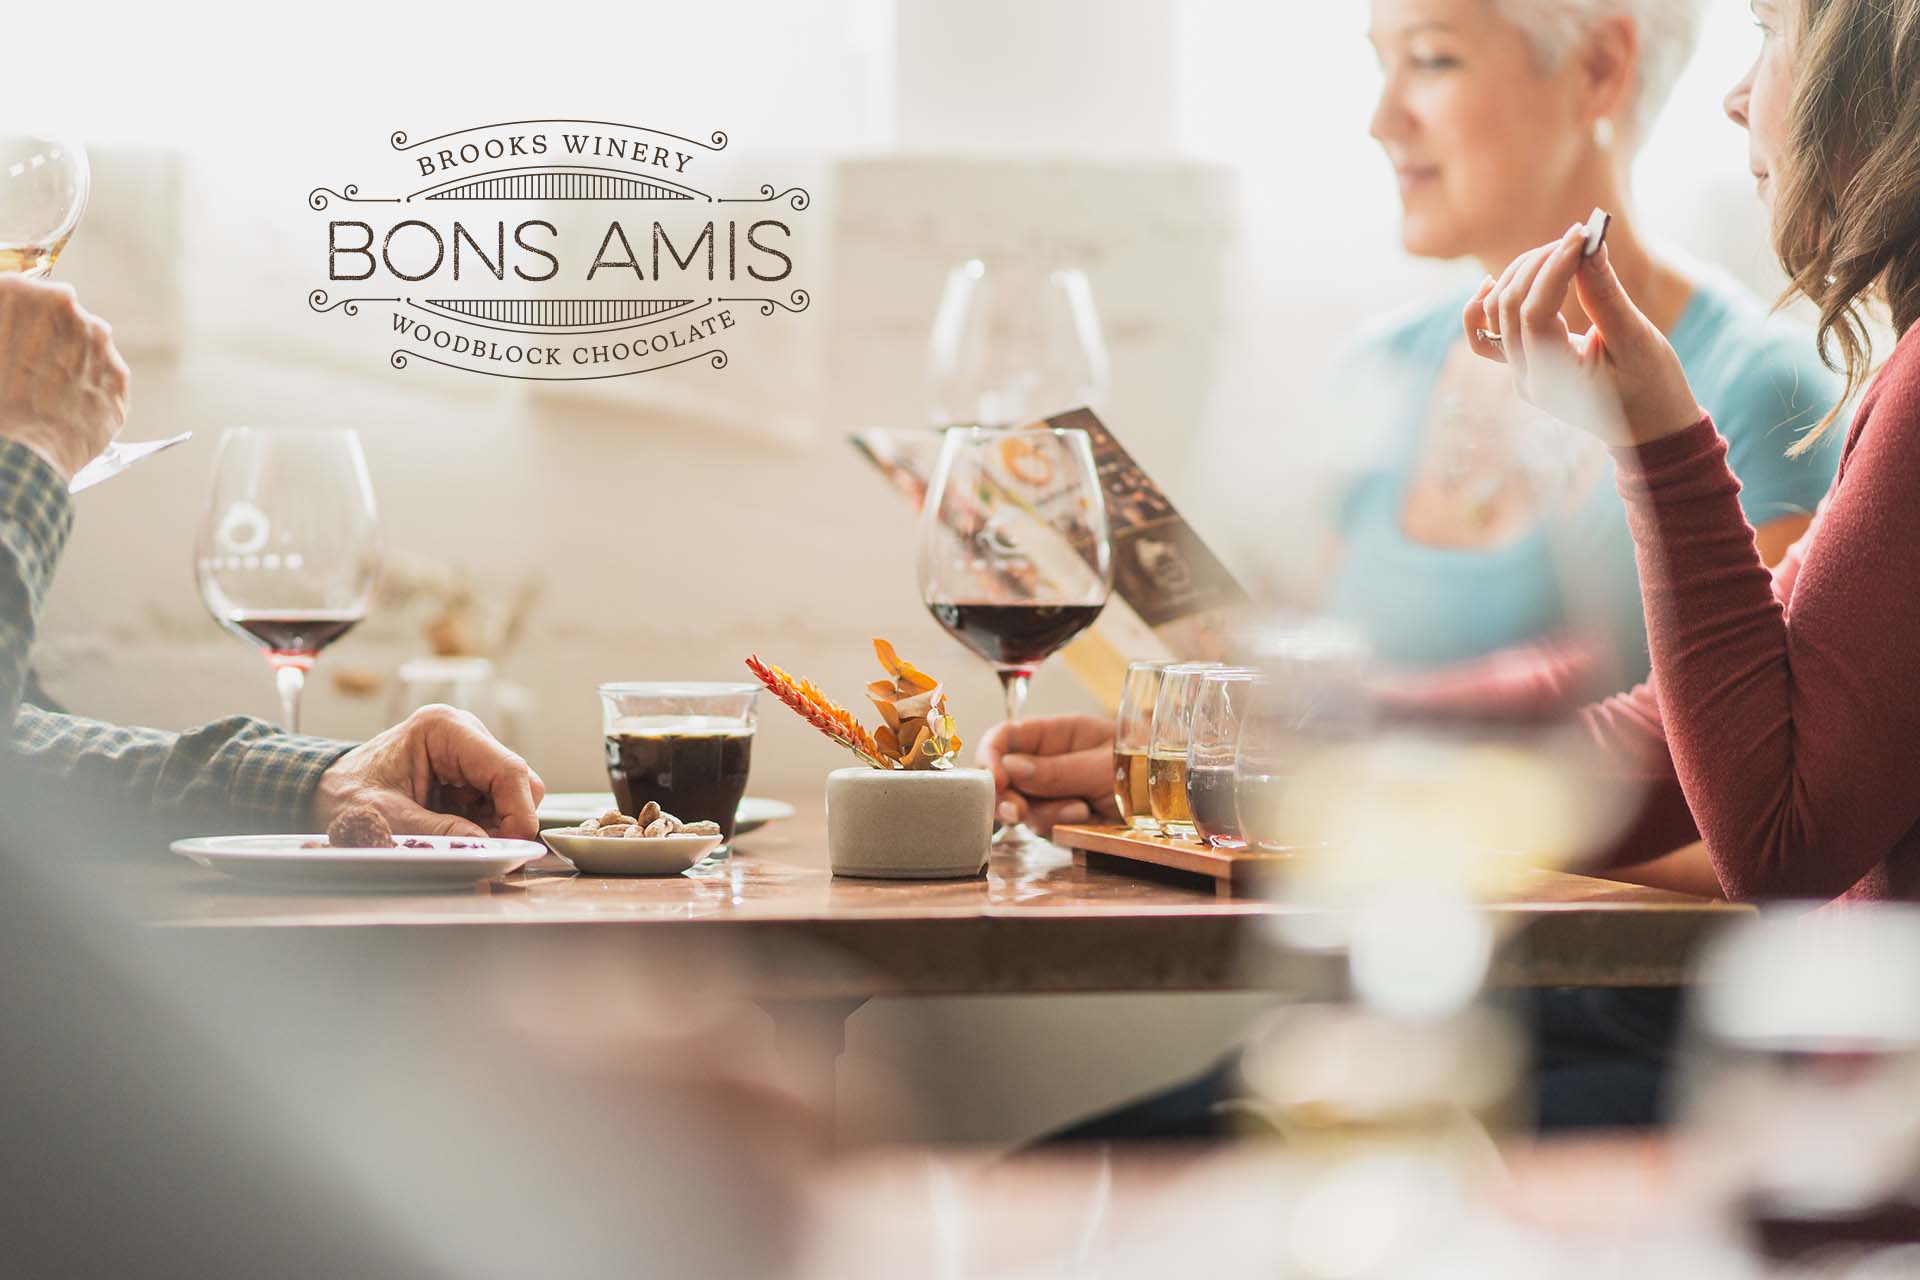 Friends sitting at table drinking Brooks wine and eating chocolate, with Brooks Bons Amis logo